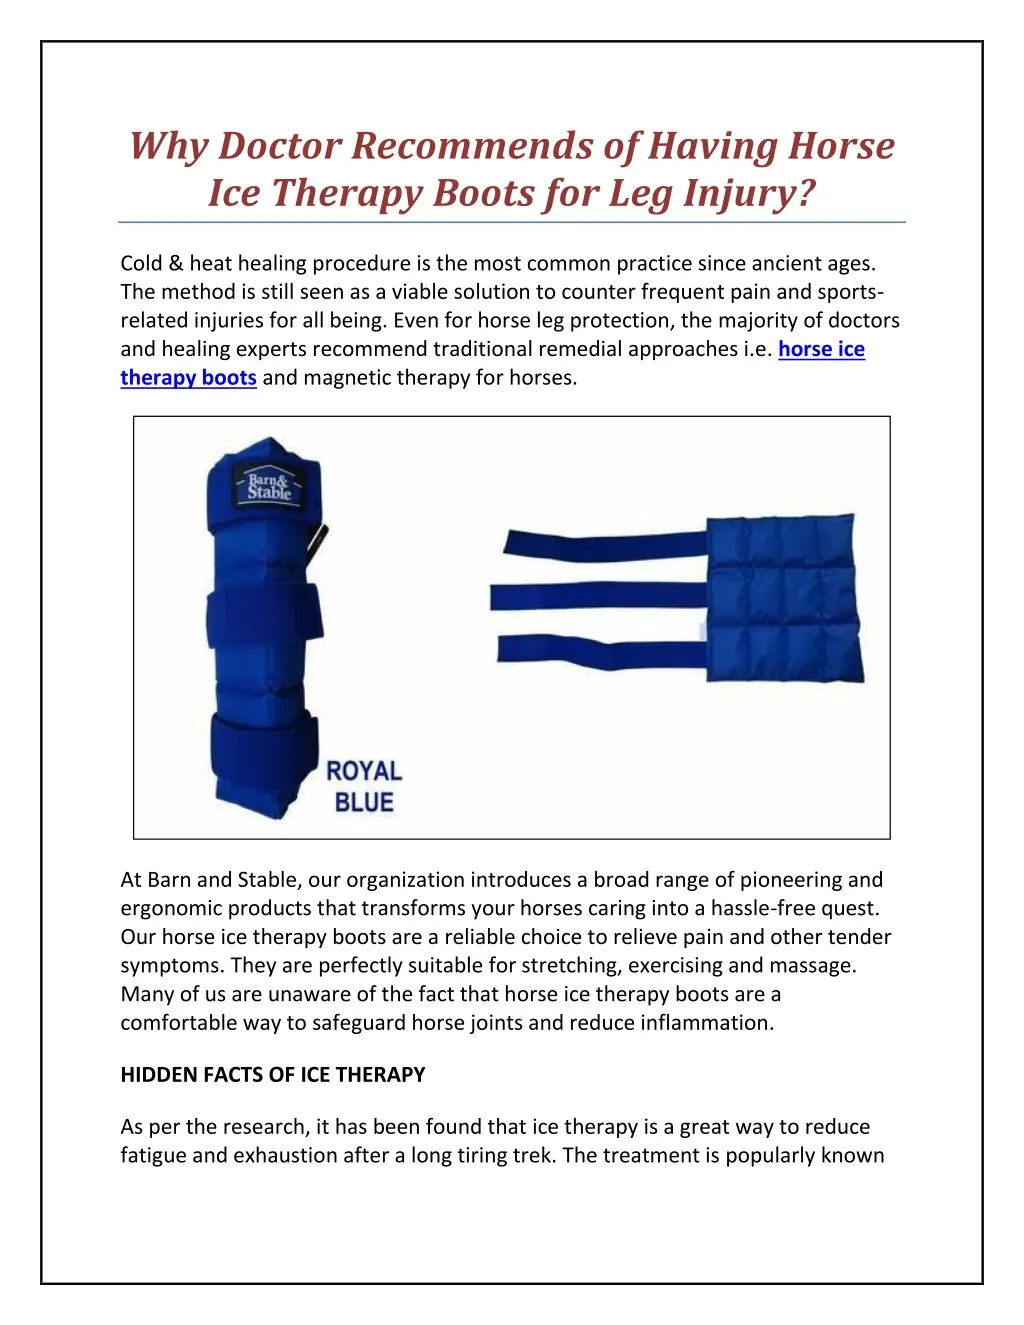 why doctor recommends of having horse ice therapy